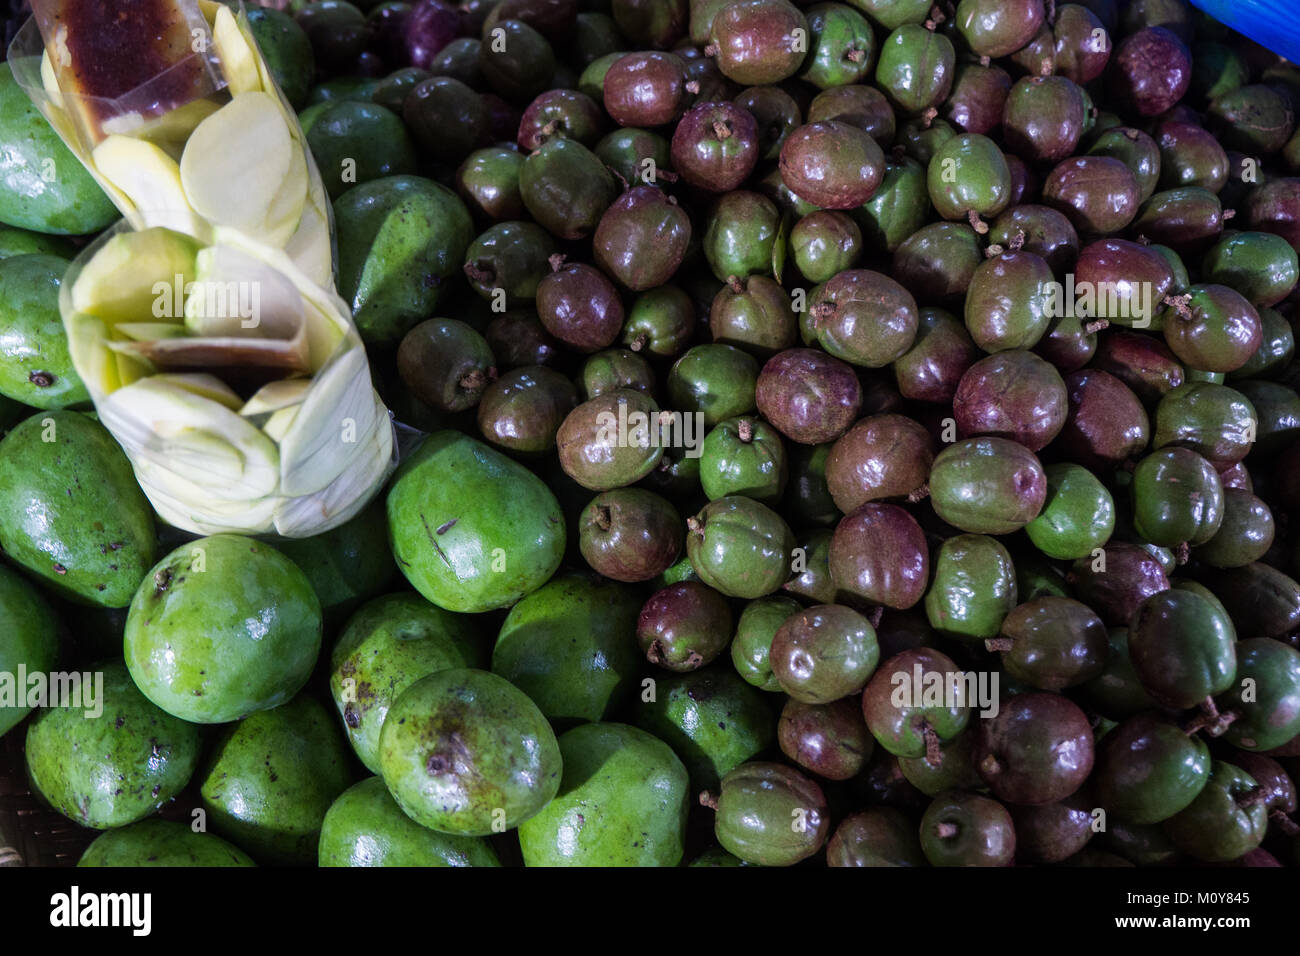 Mango and Passionfruit at the market in Puerto Princesa, Palawan, Philippines Stock Photo